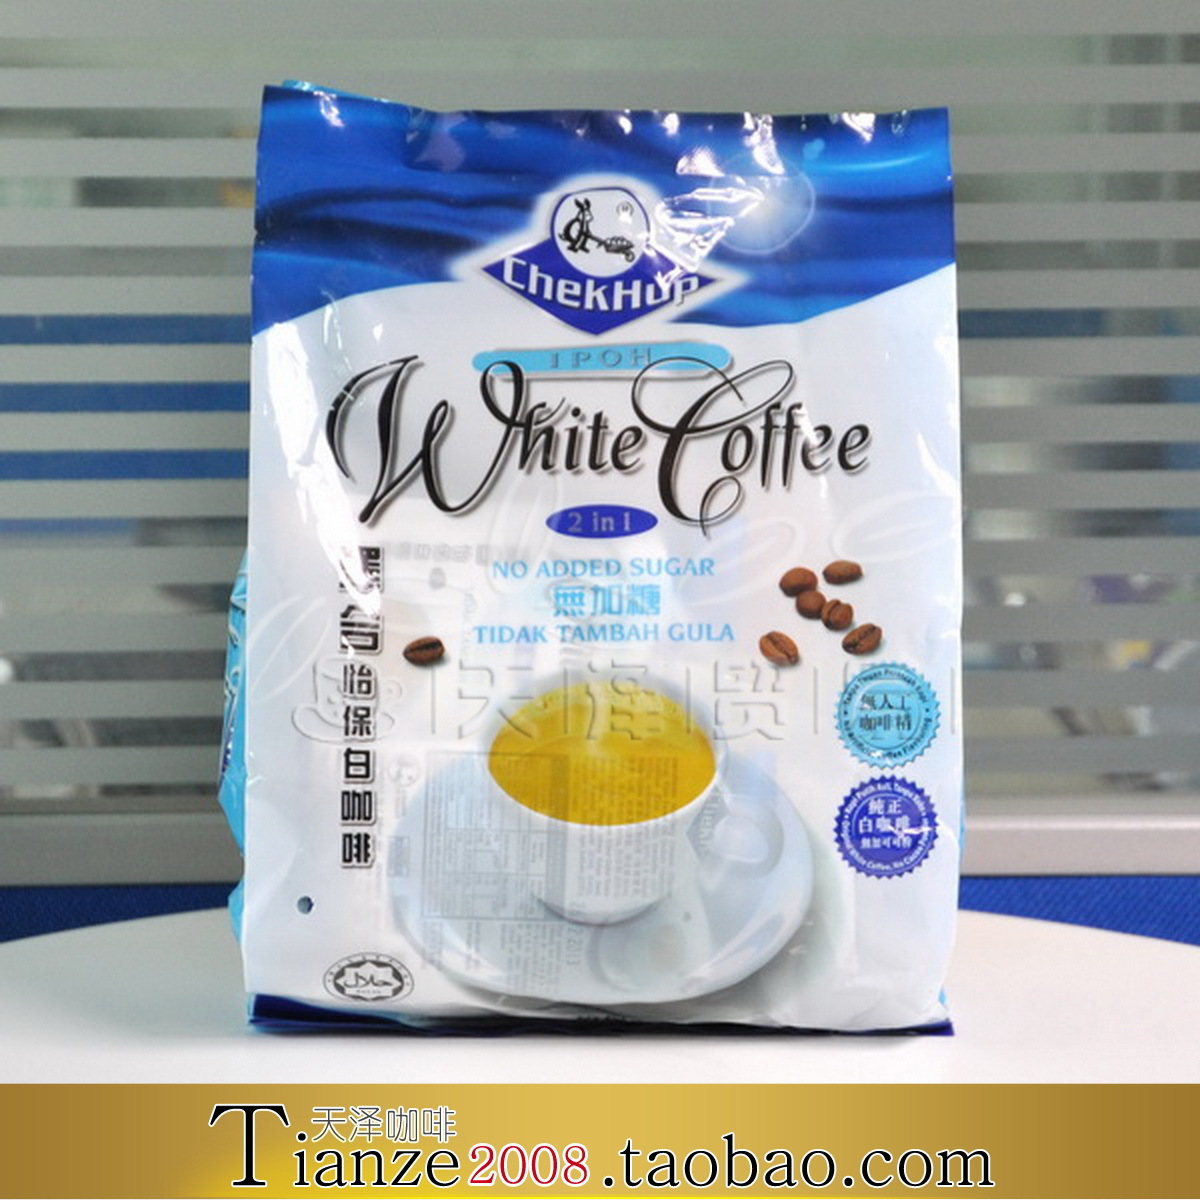 White coffee two in one sugar free instant coffee 450g s019a